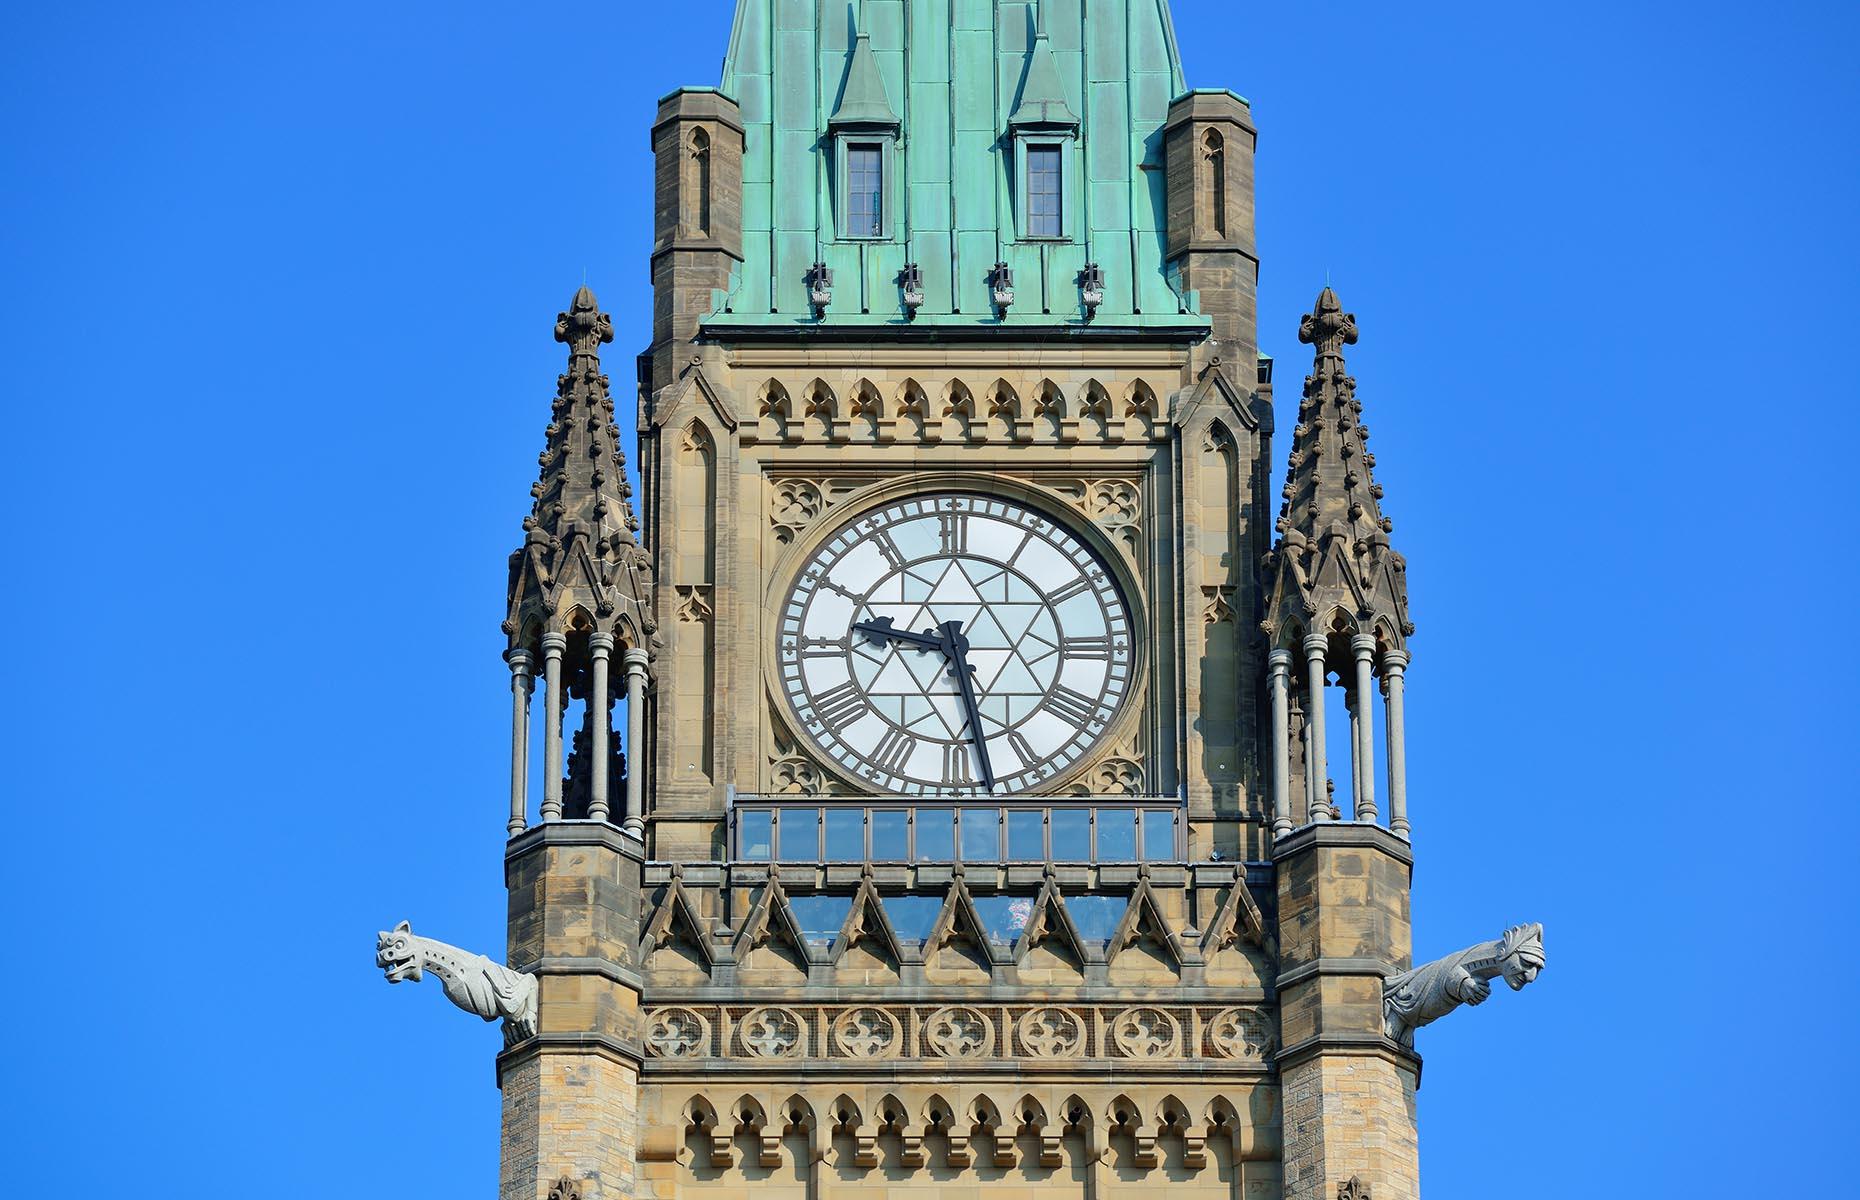 Located on a grand neo-Gothic building that houses the nation's parliament, this clock also overlooks a popular canal that's filled with boats in summer and ice skaters in winter.